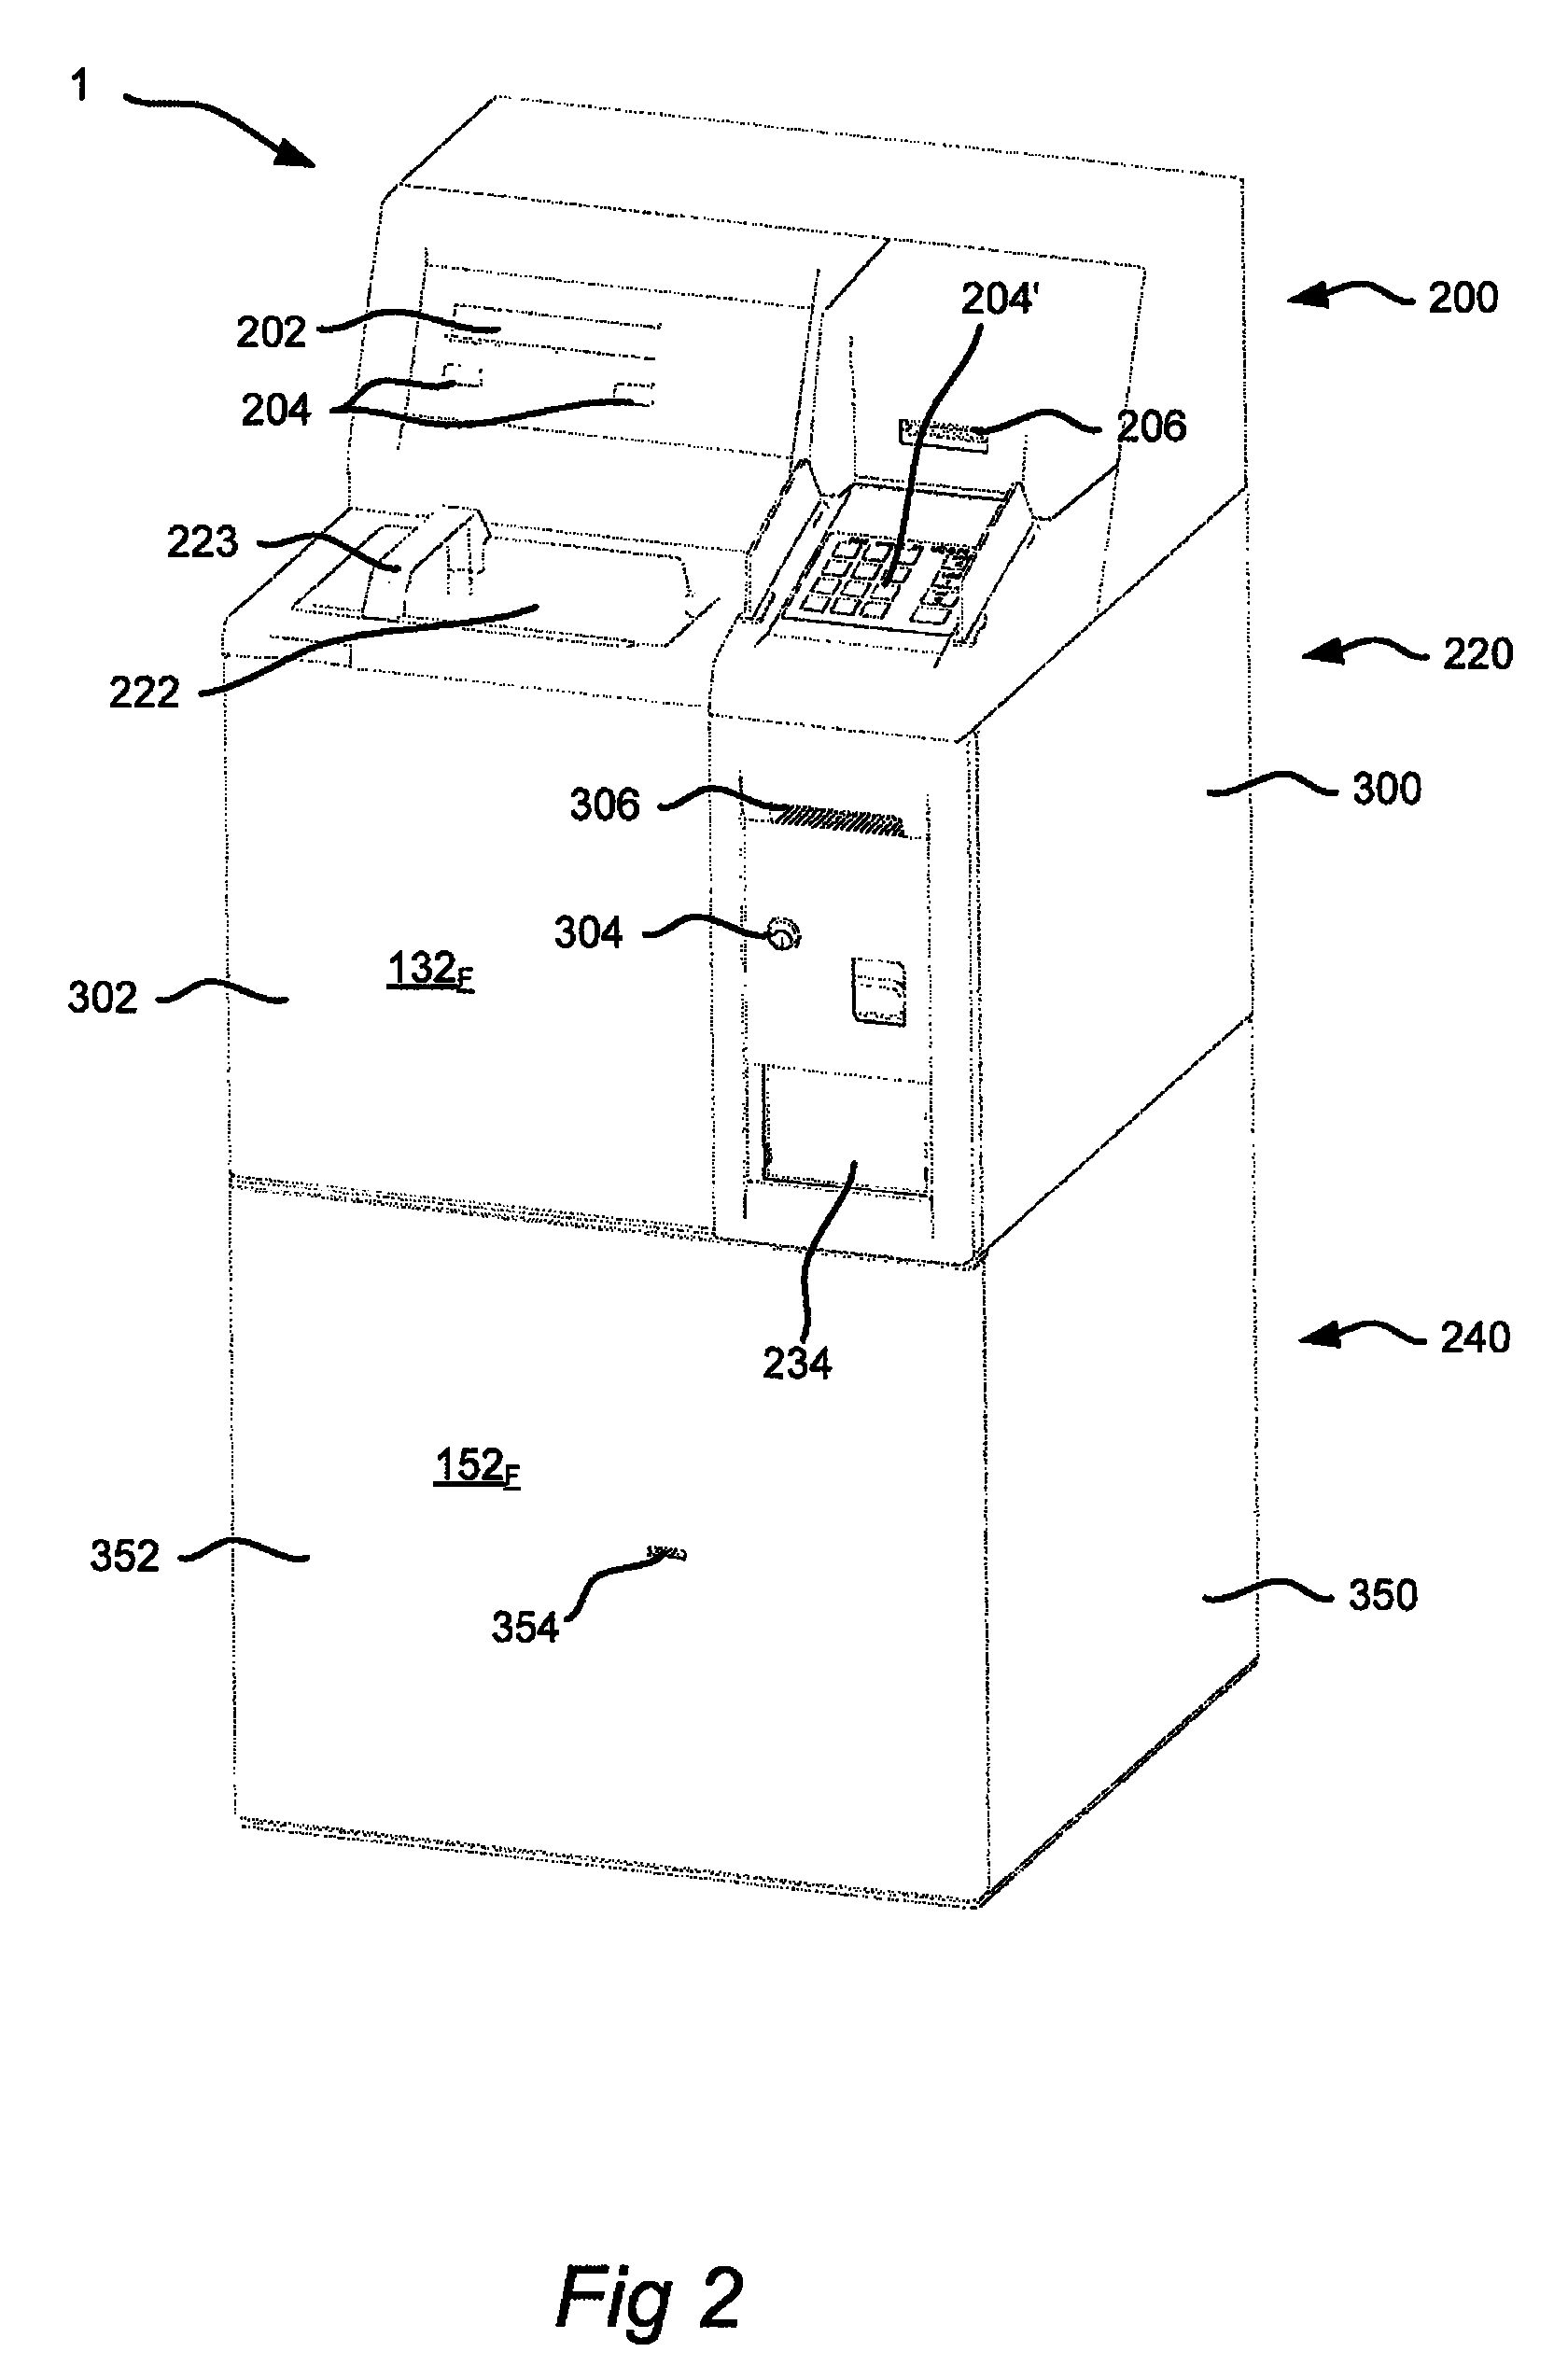 Cash deposit apparatus and associated methods and devices